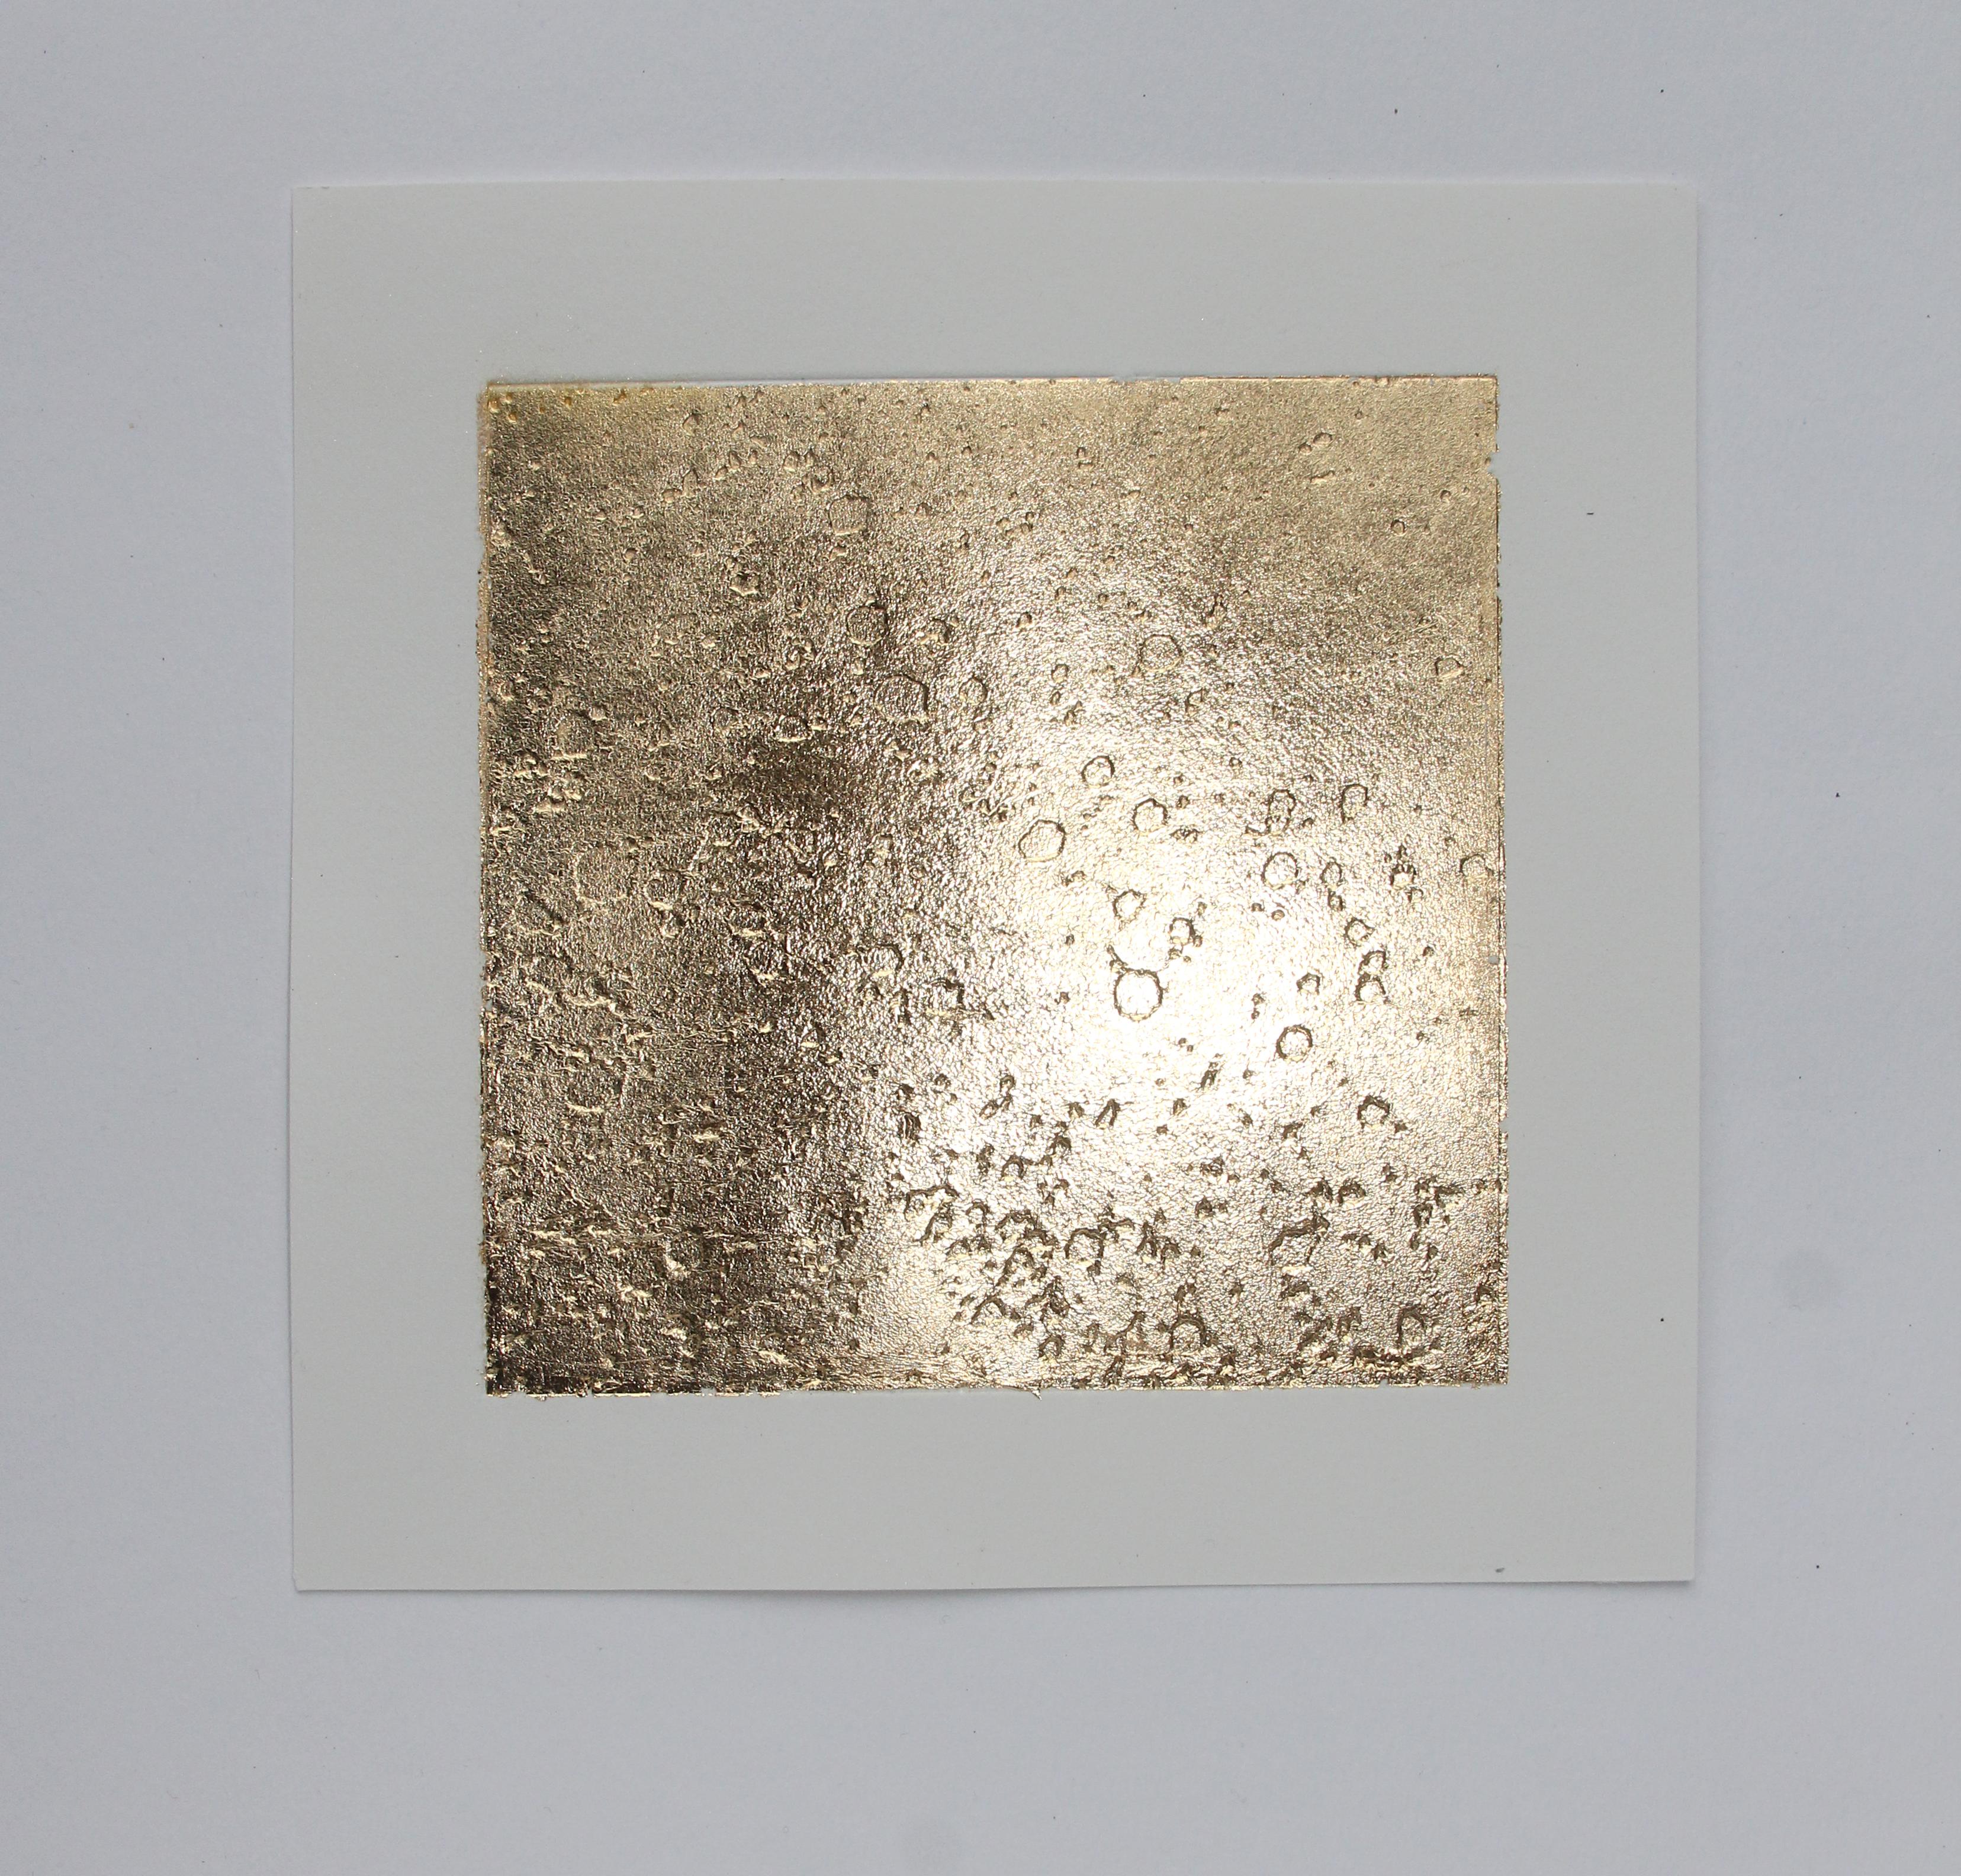 Joy is not made to be a Crumb (Gold): Bubbles in the Sand, Hand-Pulled Etching - Print by Jayne Wilton